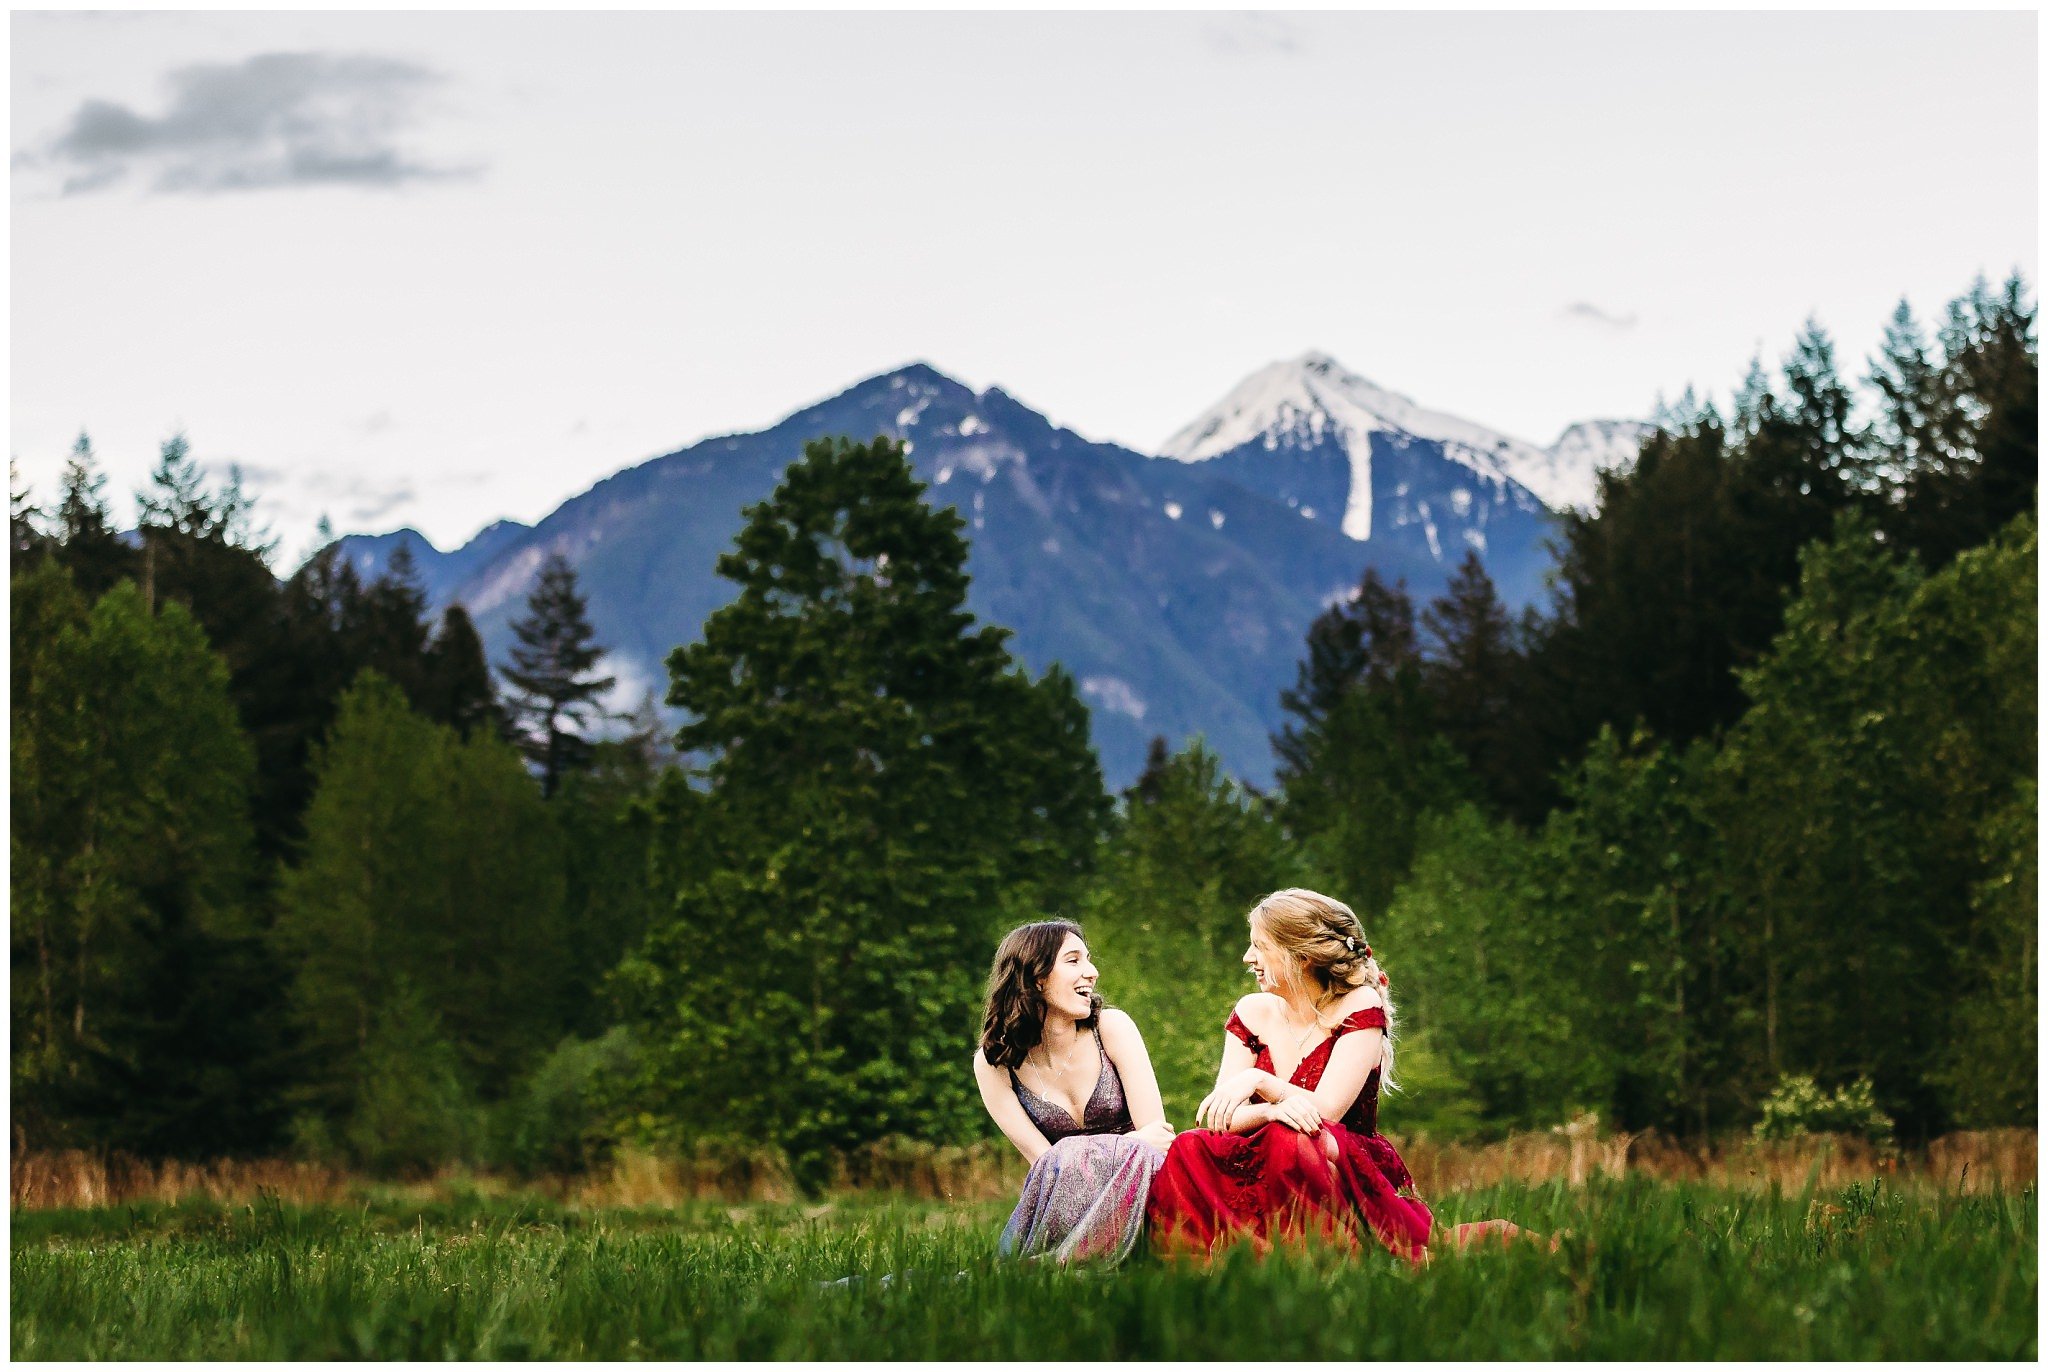 Prom Photographer in Chilliwack, BC